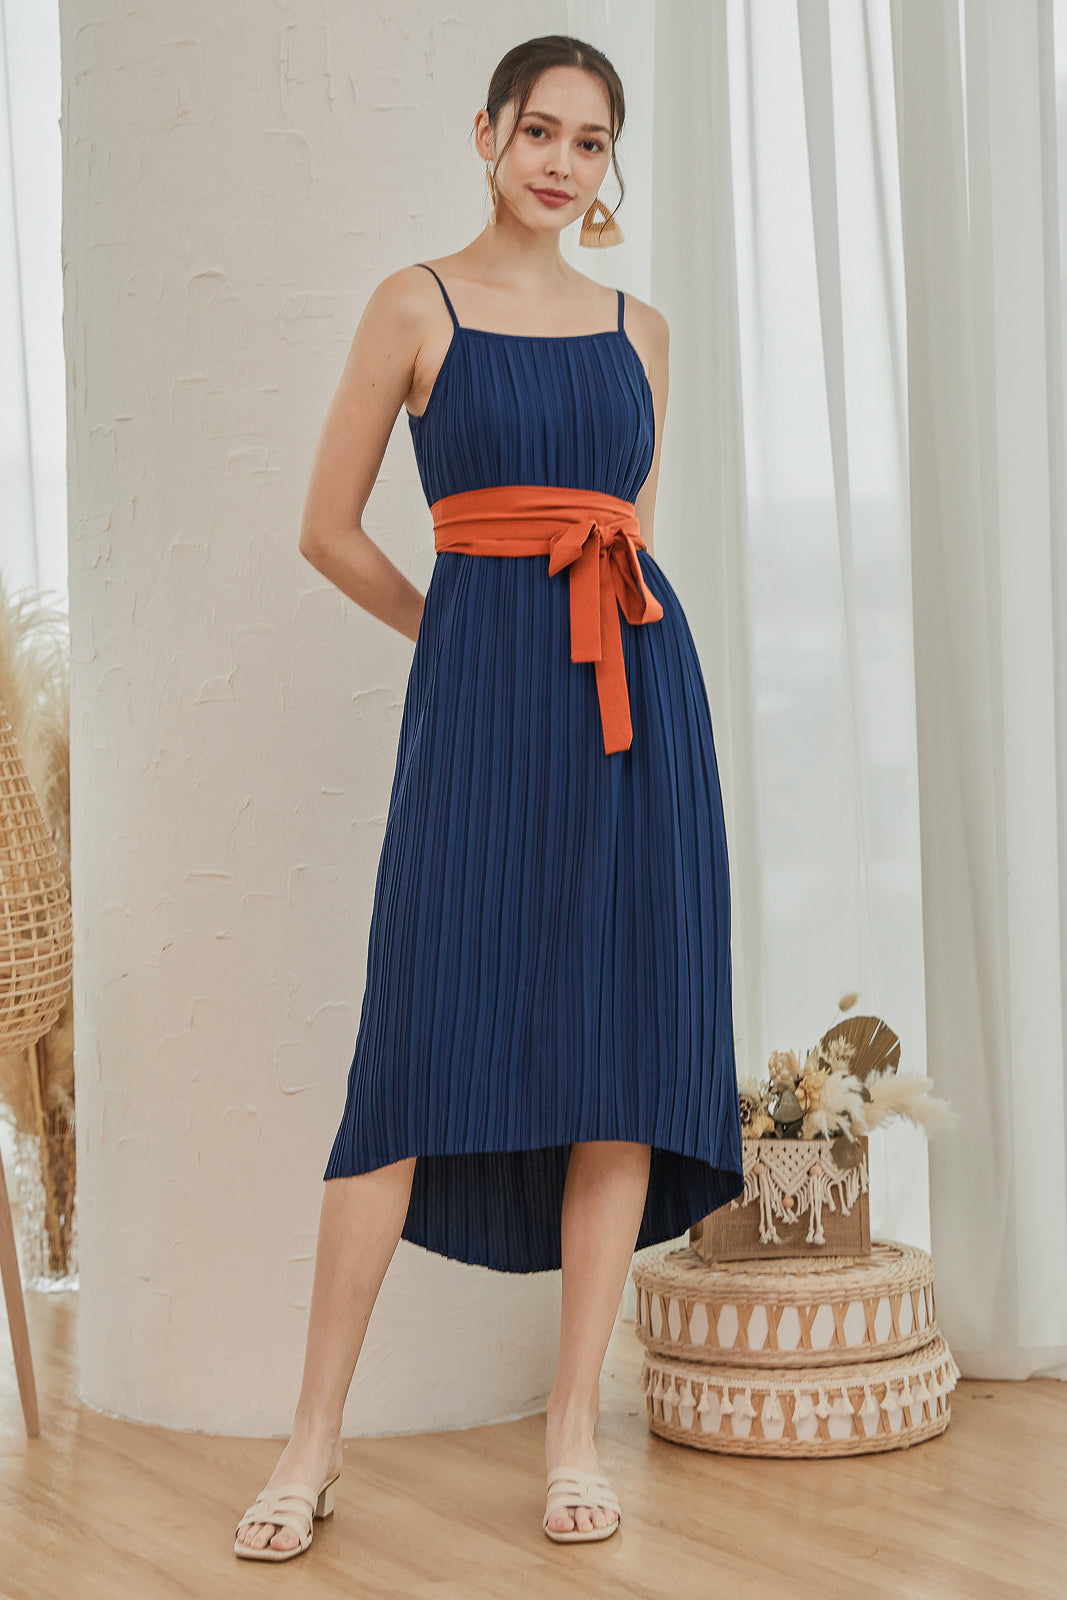 Sicily Contrast Sash Pleated Dress in Royal Blue